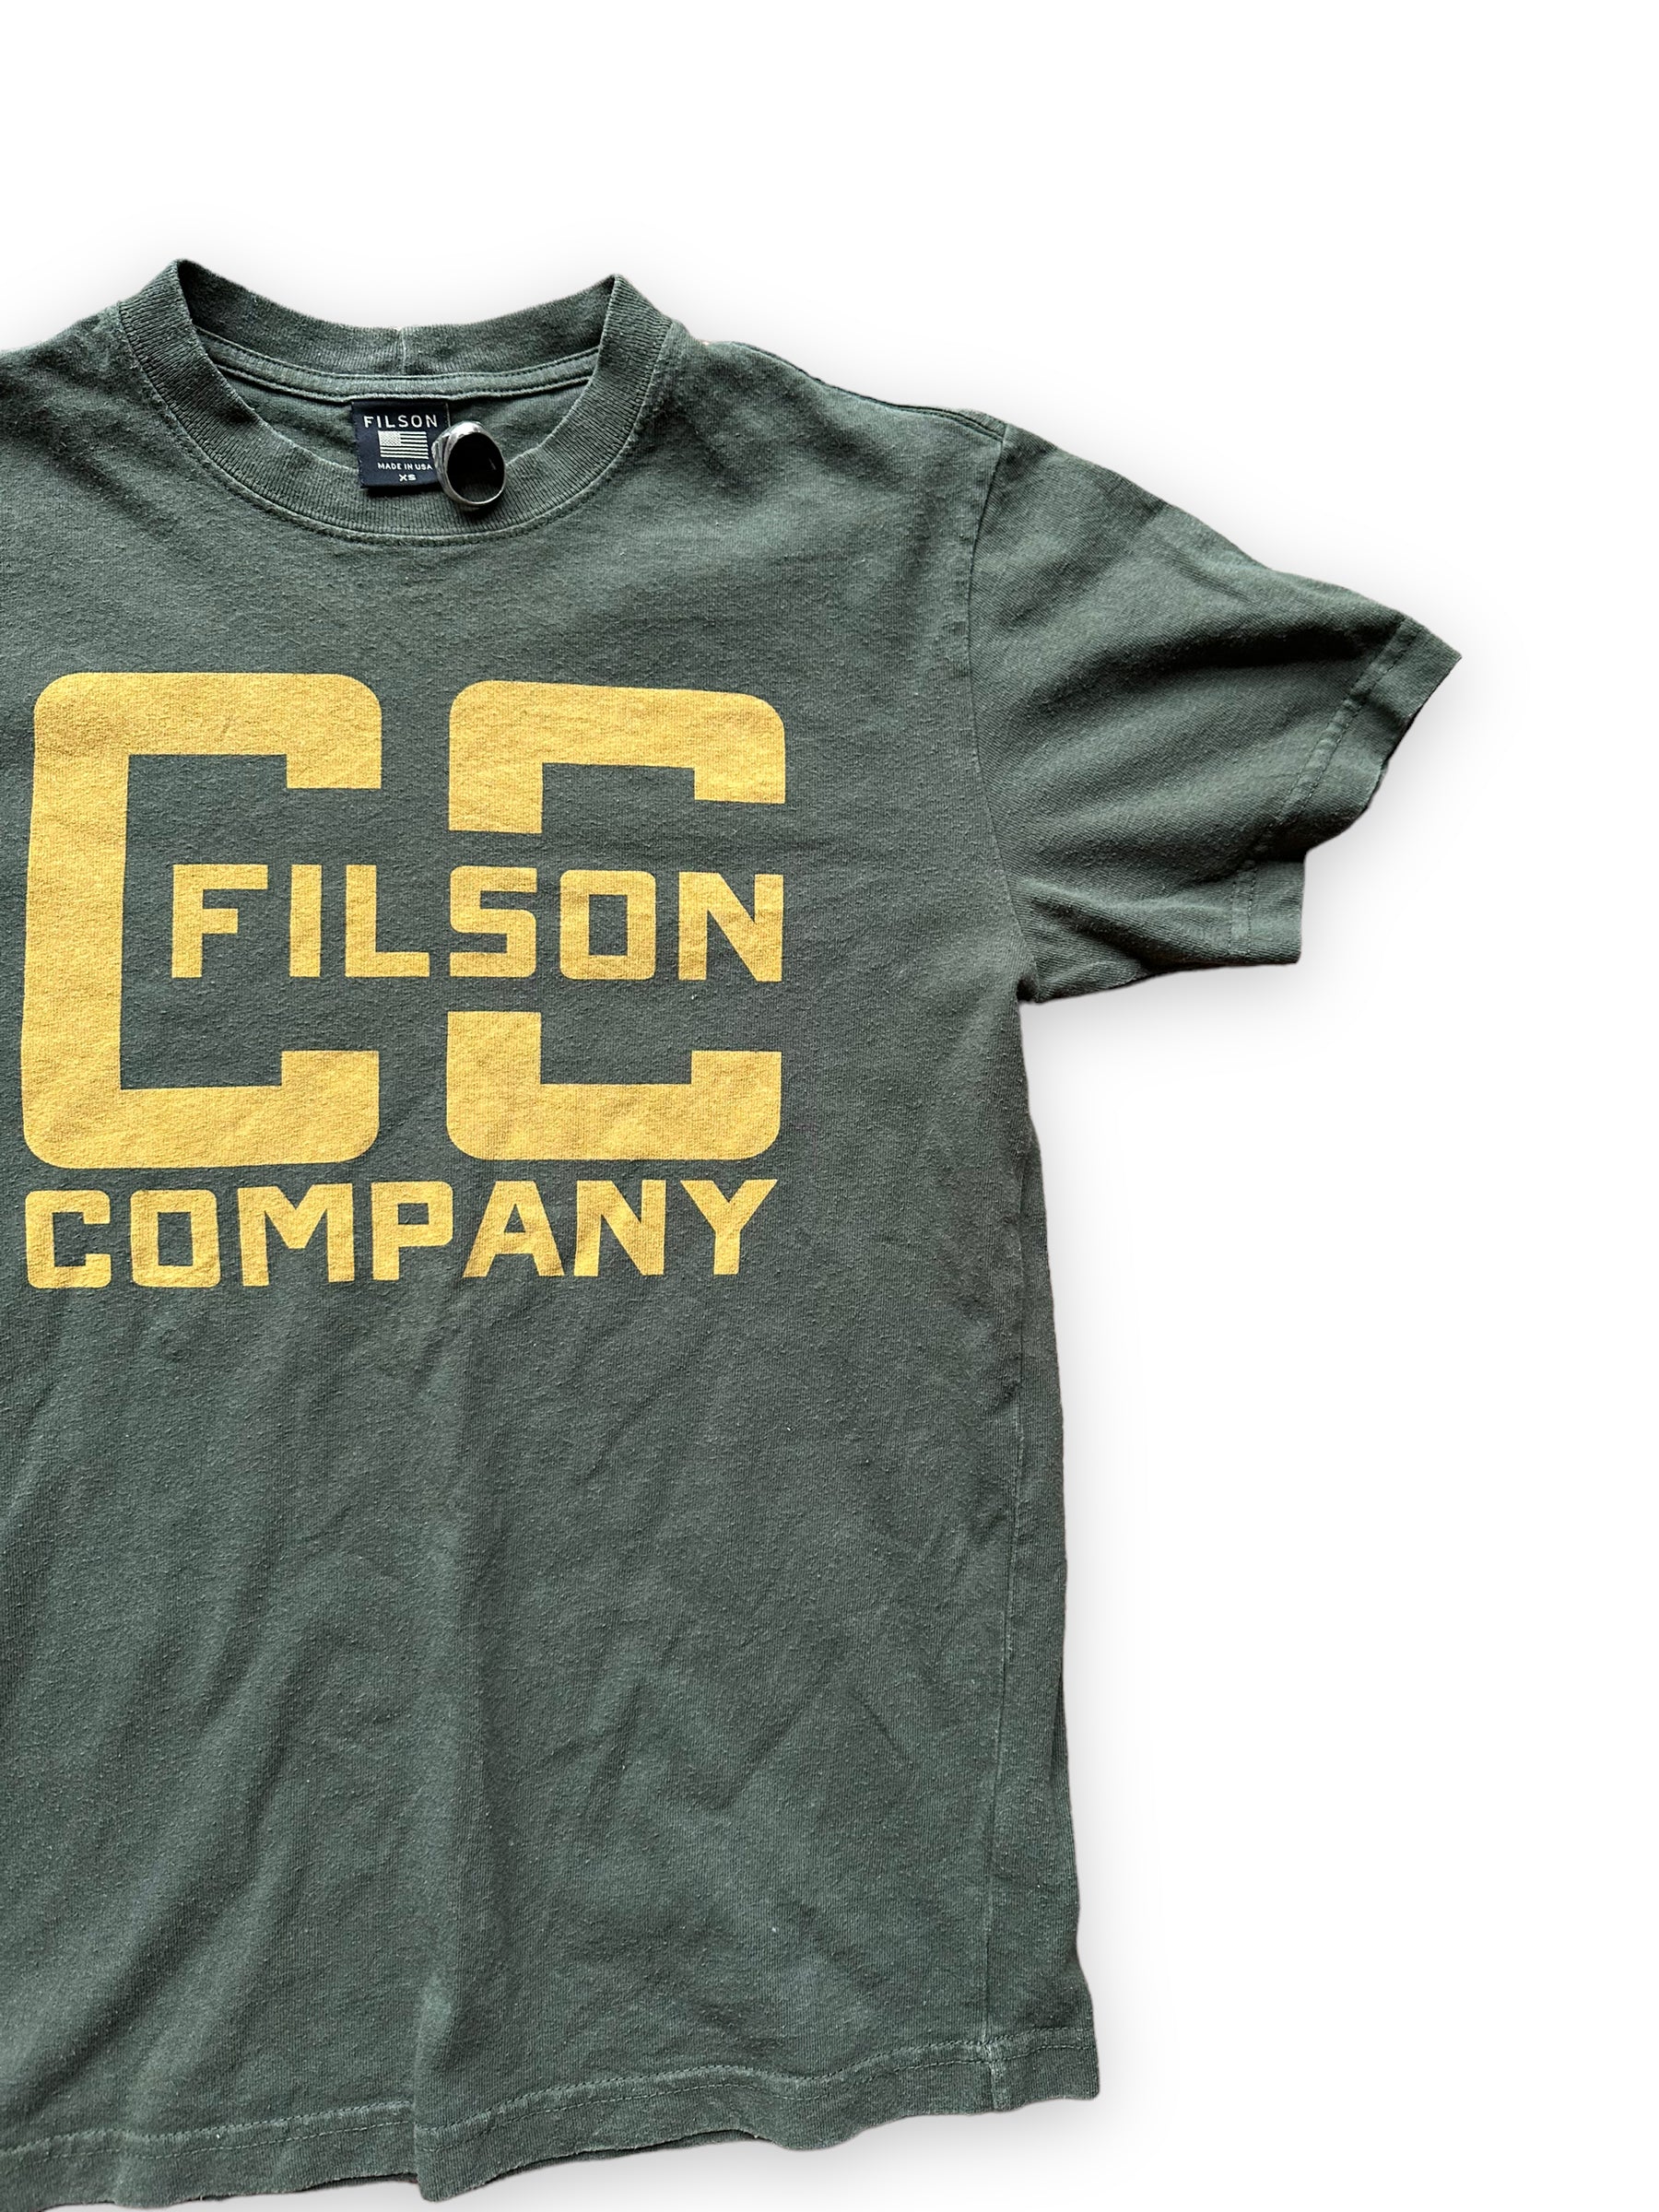 Front Left View of Olive Green Filson Cotton Tee SZ XS  |  Barn Owl Vintage Goods | Filson Graphic Tees Seattle